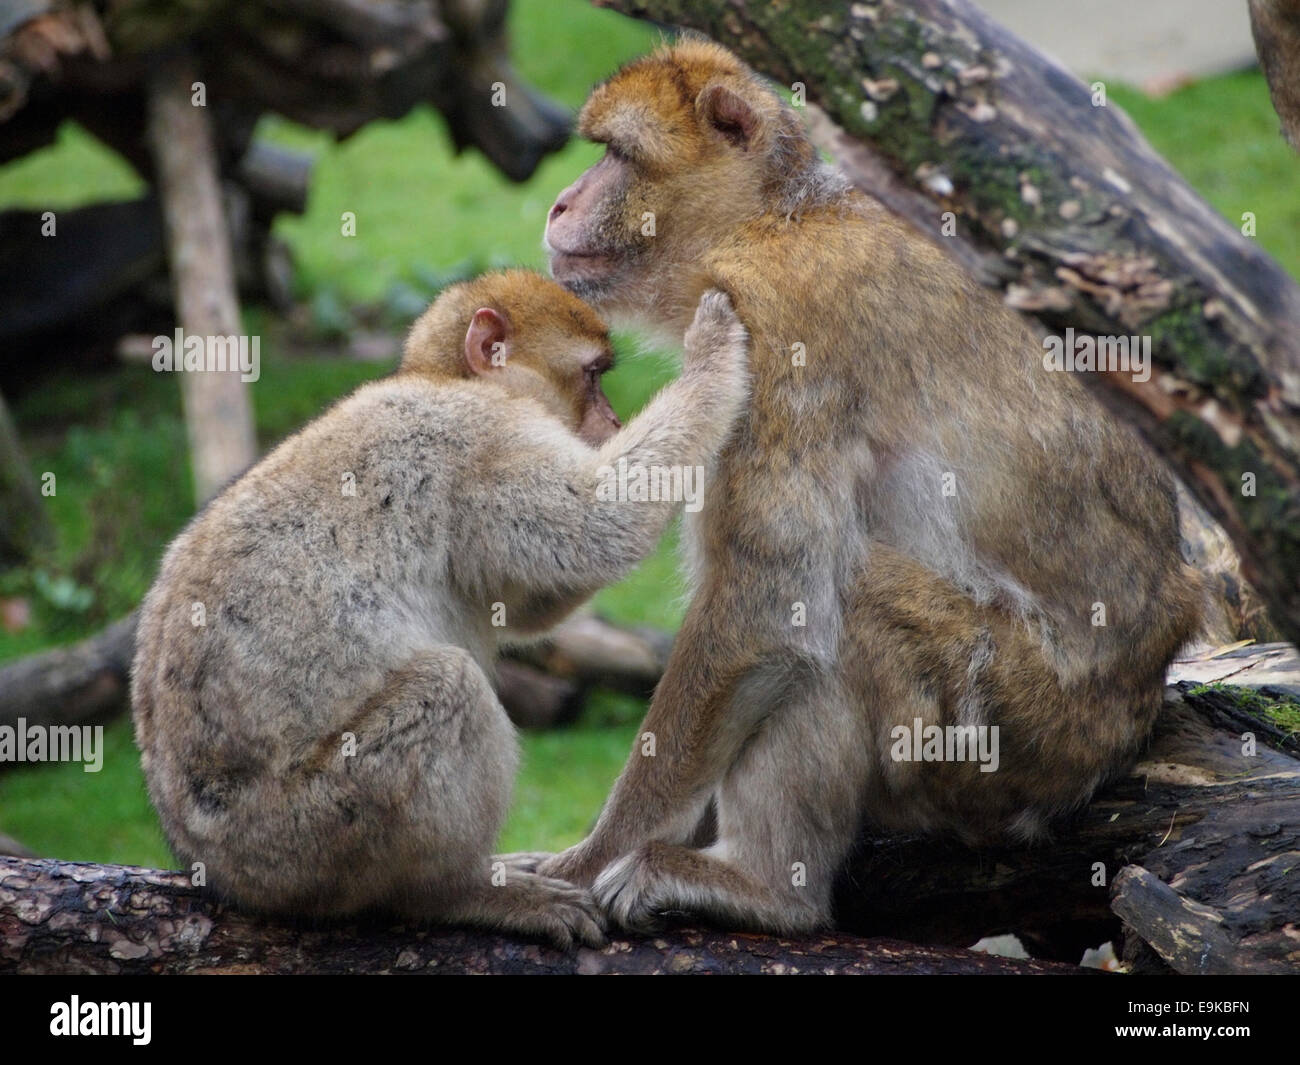 Smaller baboon grooming looking for fleas and parasites on a bigger baboon. Apenheul zoo, Apeldoorn, the Netherlands Stock Photo